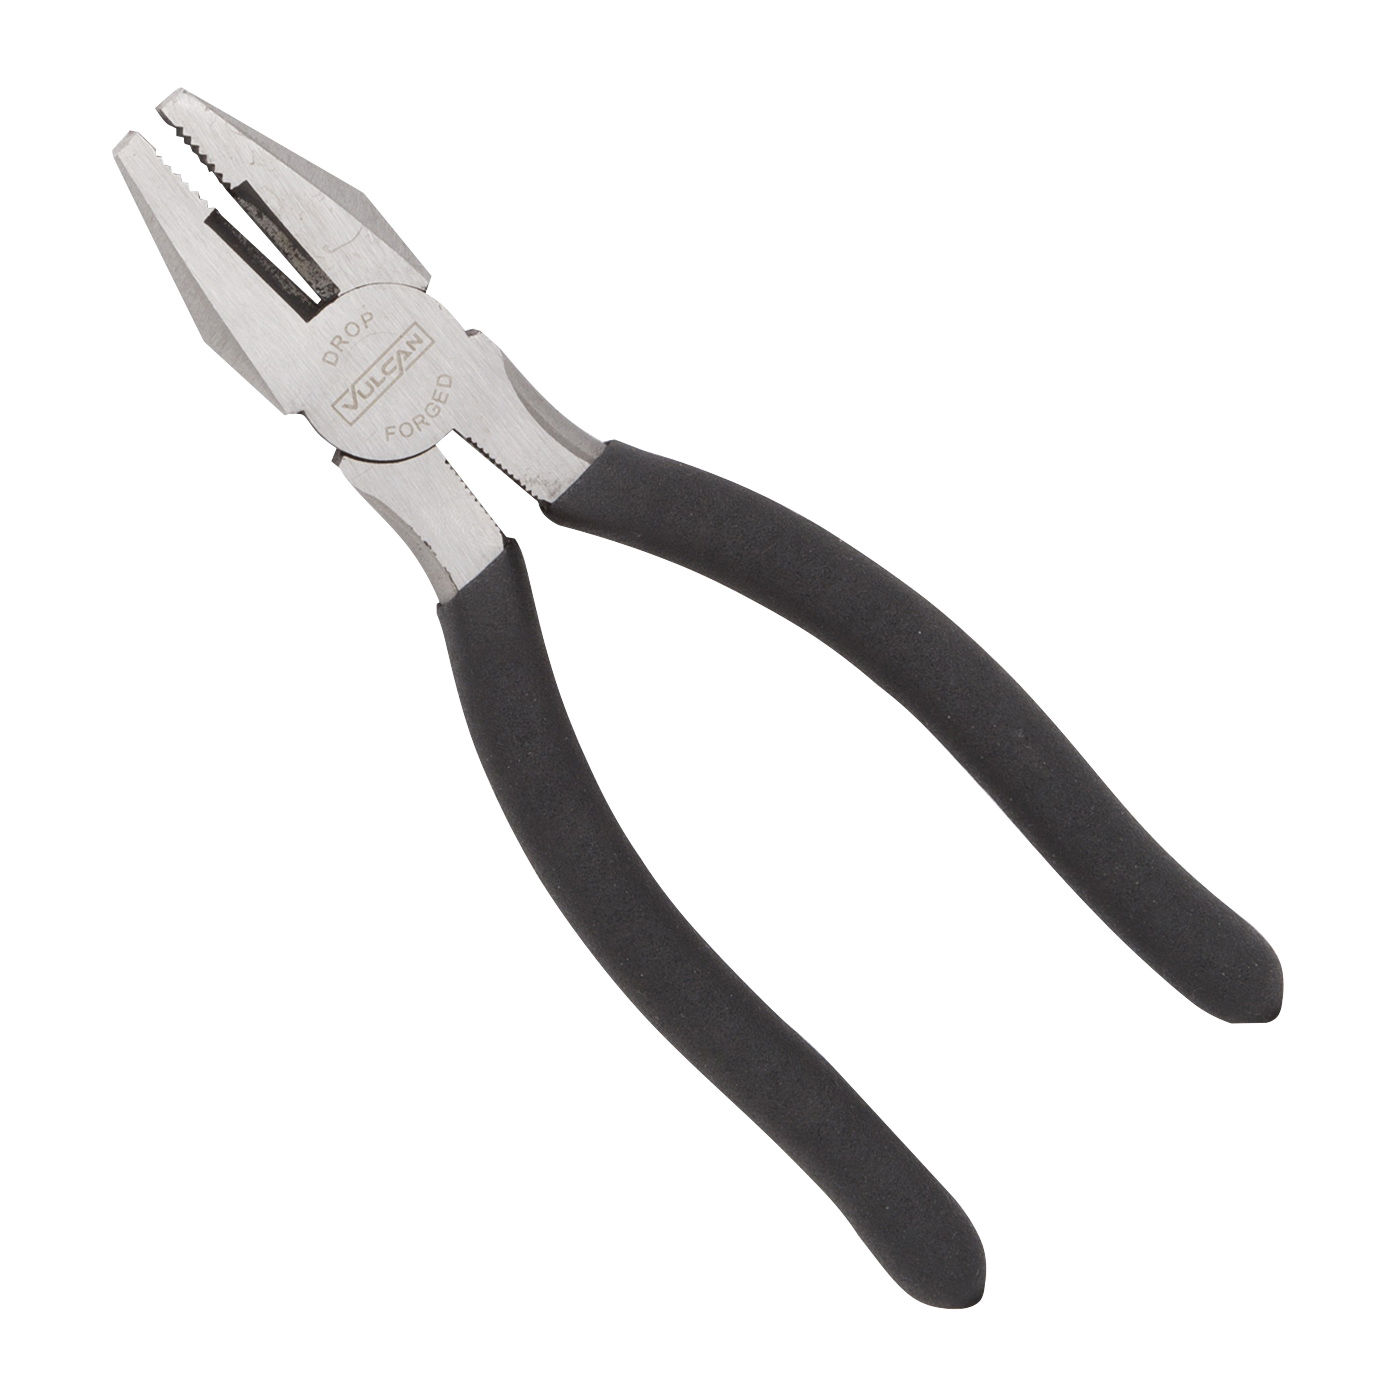 JL-NP005 Linesman Plier, 7 in OAL, 1.2 mm Cutting Capacity, 1-1/4 in Jaw Opening, Black Handle, Non-Slip Handle